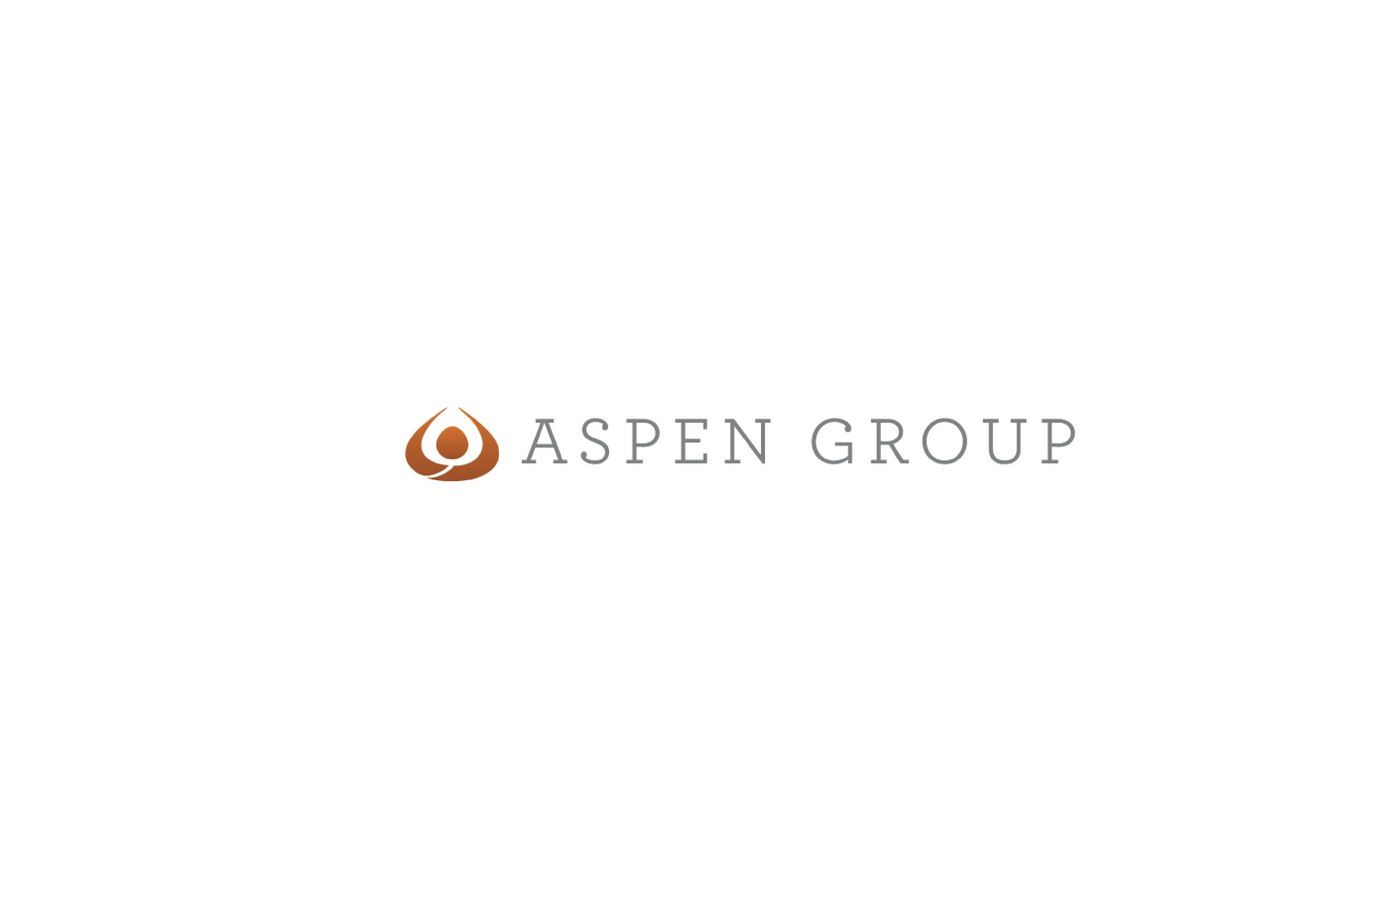 Summit_About Us_Aspen Group-01